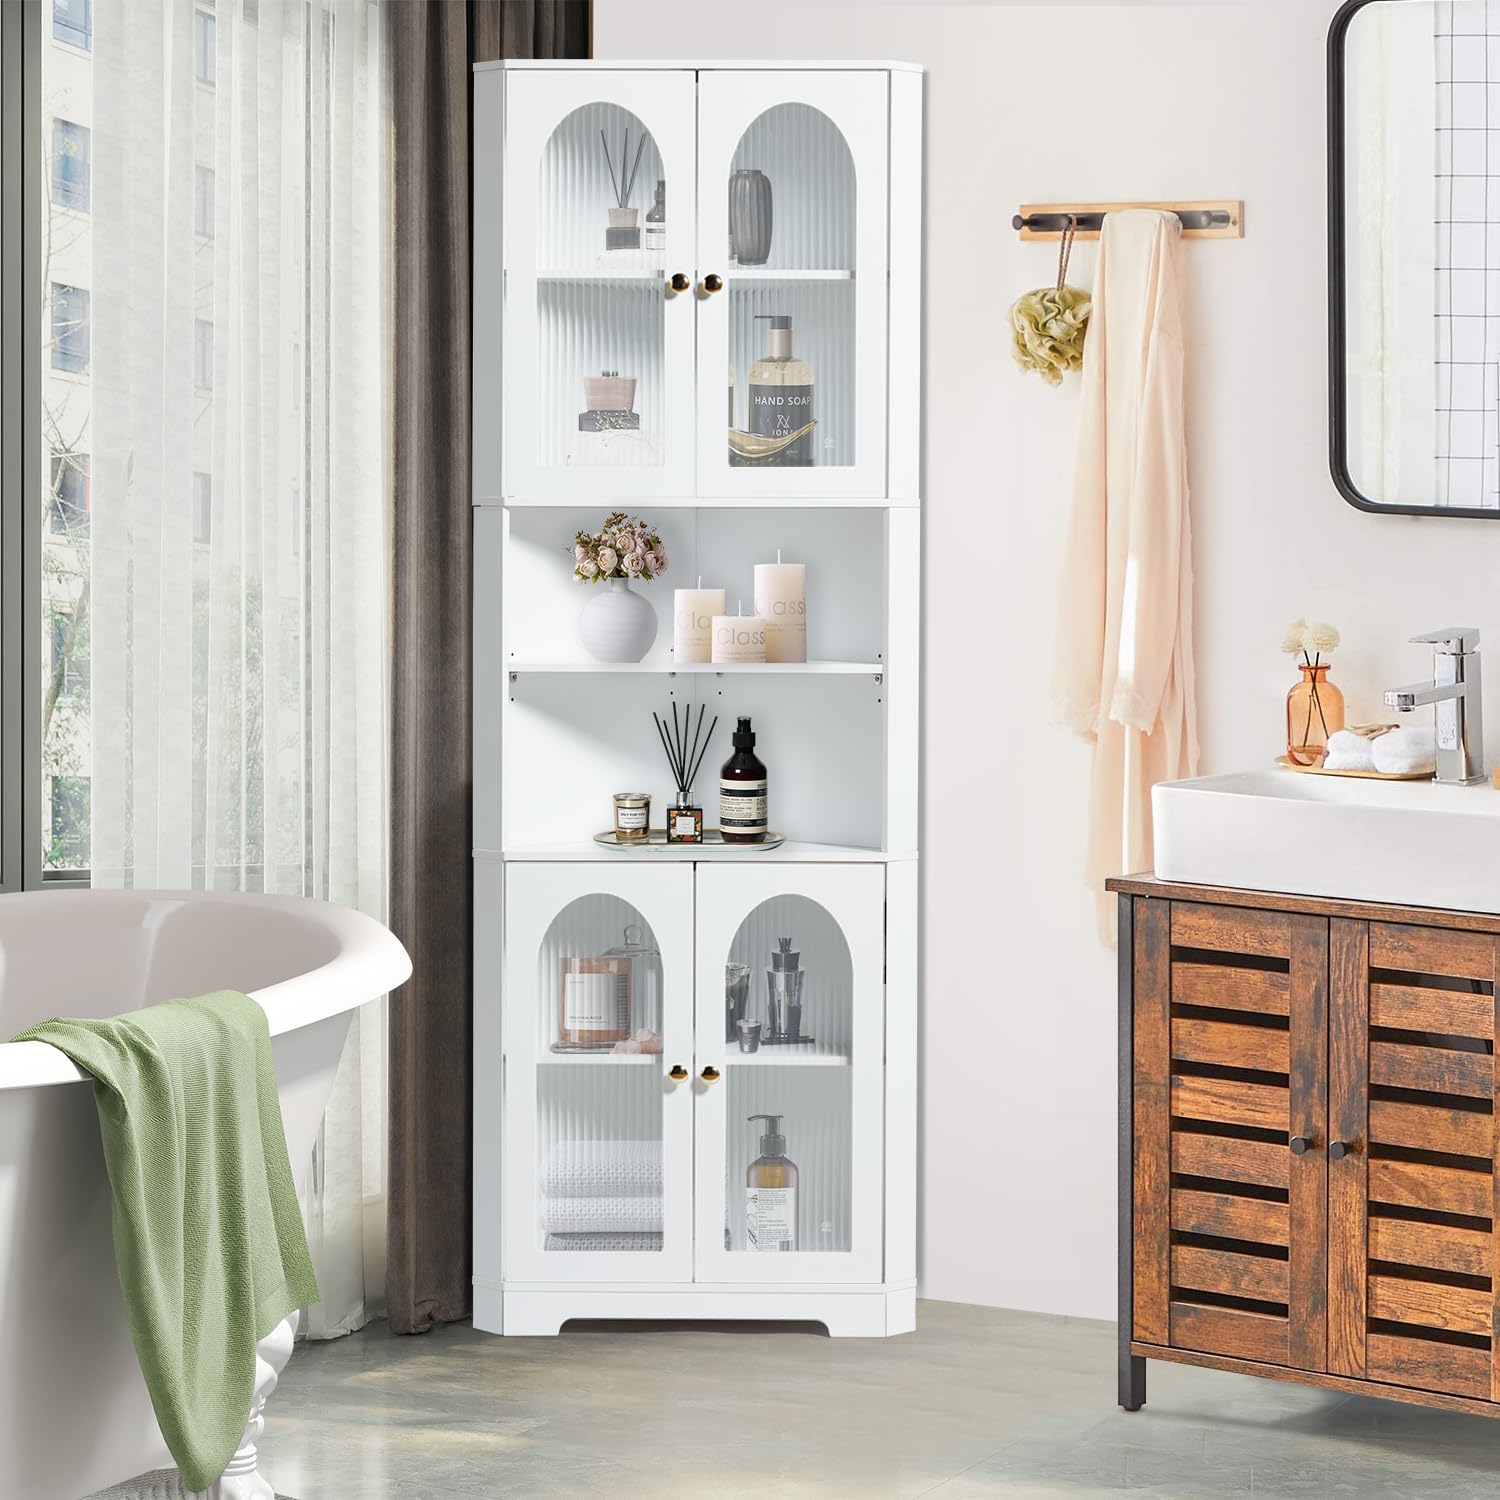 70.86" Tall Bathroom Storage Cabinet Tall Corner Cabinet with Glass Doors and LED